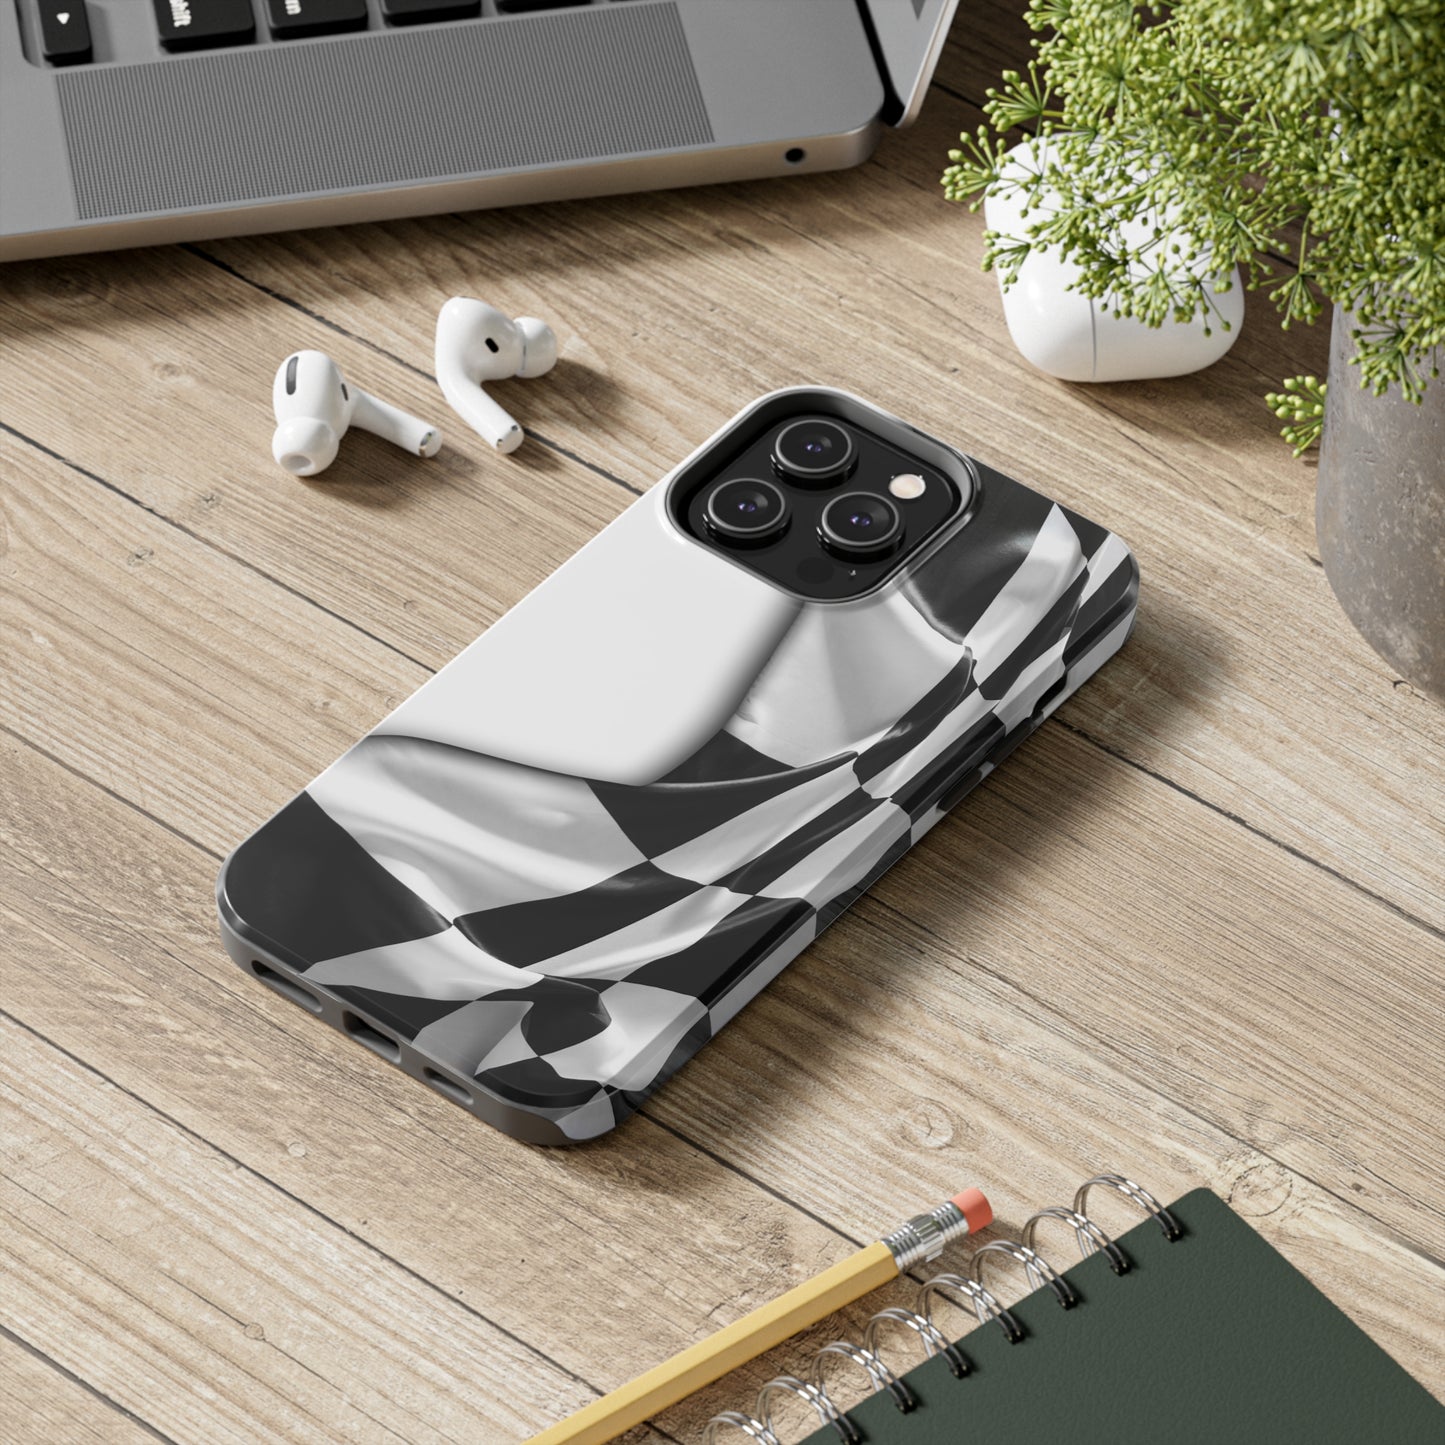 Checkered Flag Graphic Tough Phone Cases